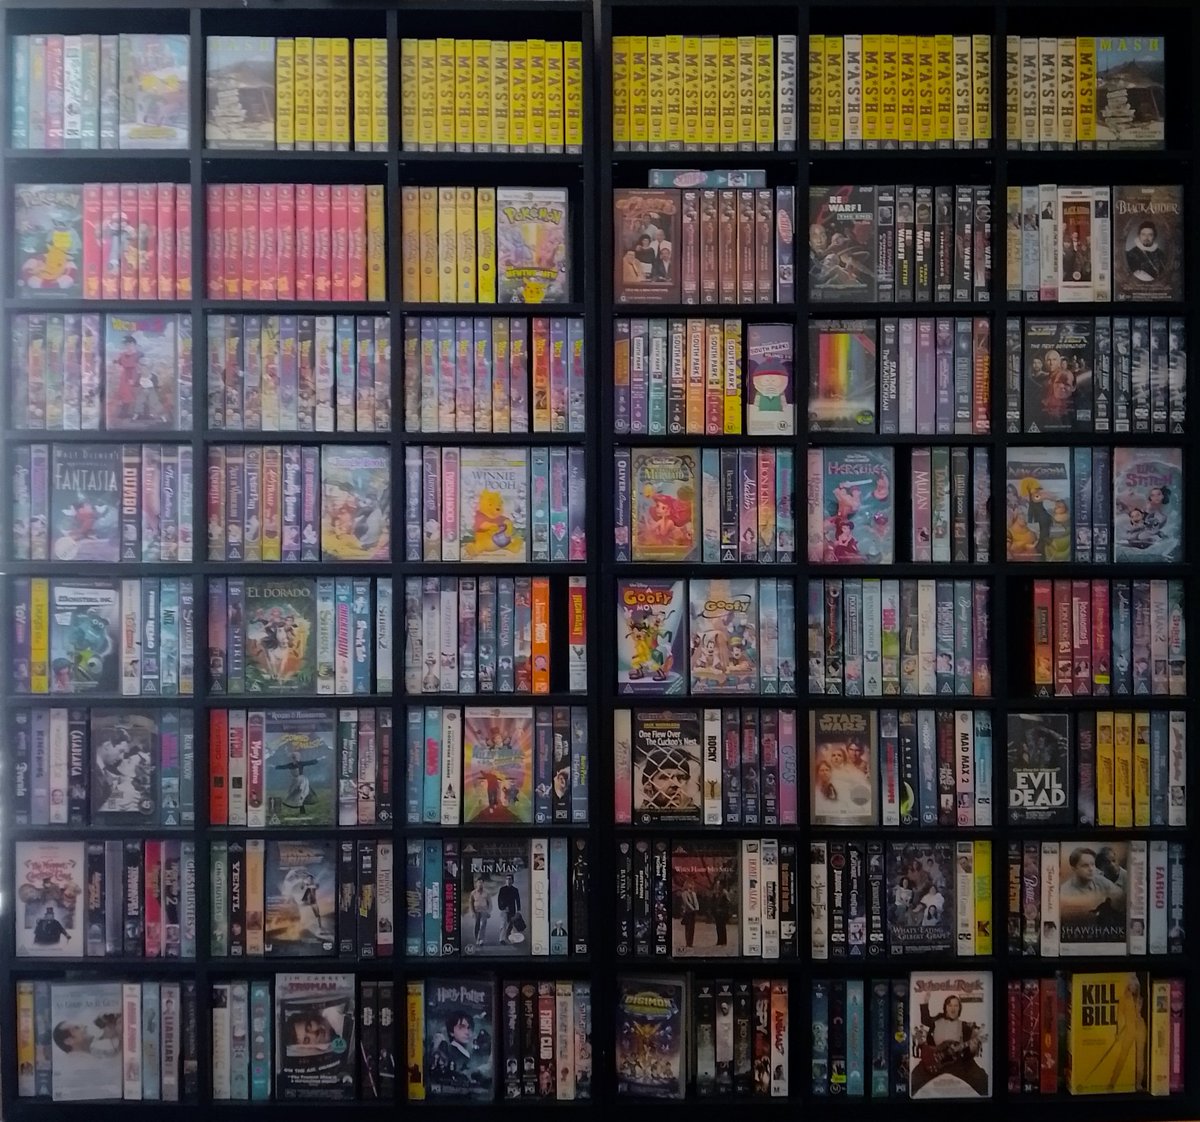 Thought I'd show off my VHS collection that I've been building for a couple years now